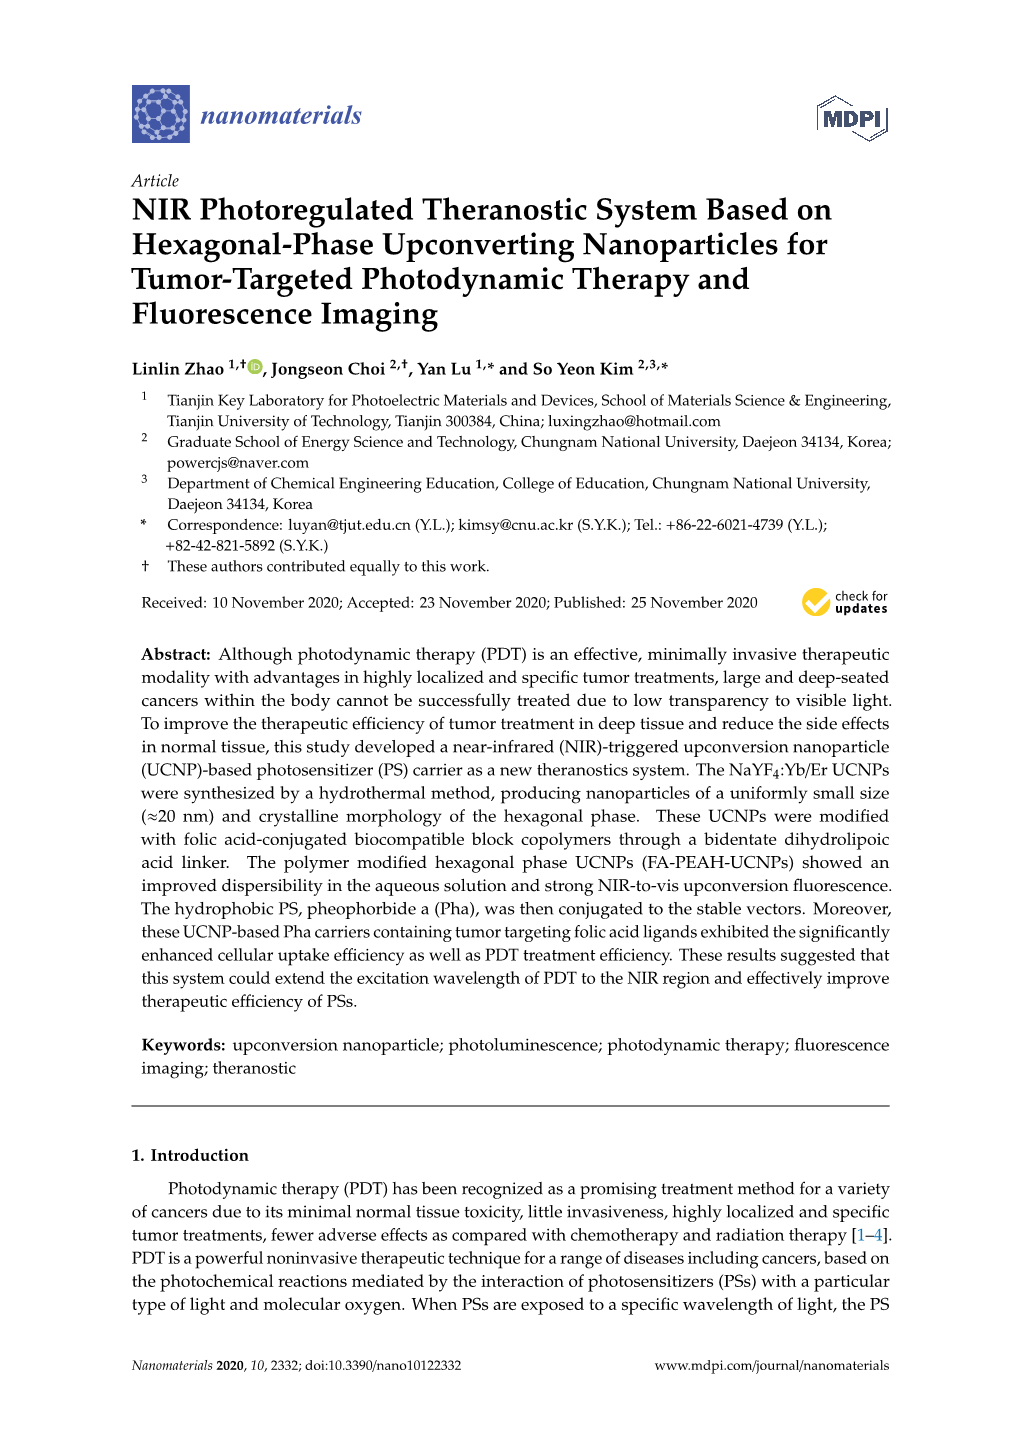 NIR Photoregulated Theranostic System Based on Hexagonal-Phase Upconverting Nanoparticles for Tumor-Targeted Photodynamic Therapy and Fluorescence Imaging